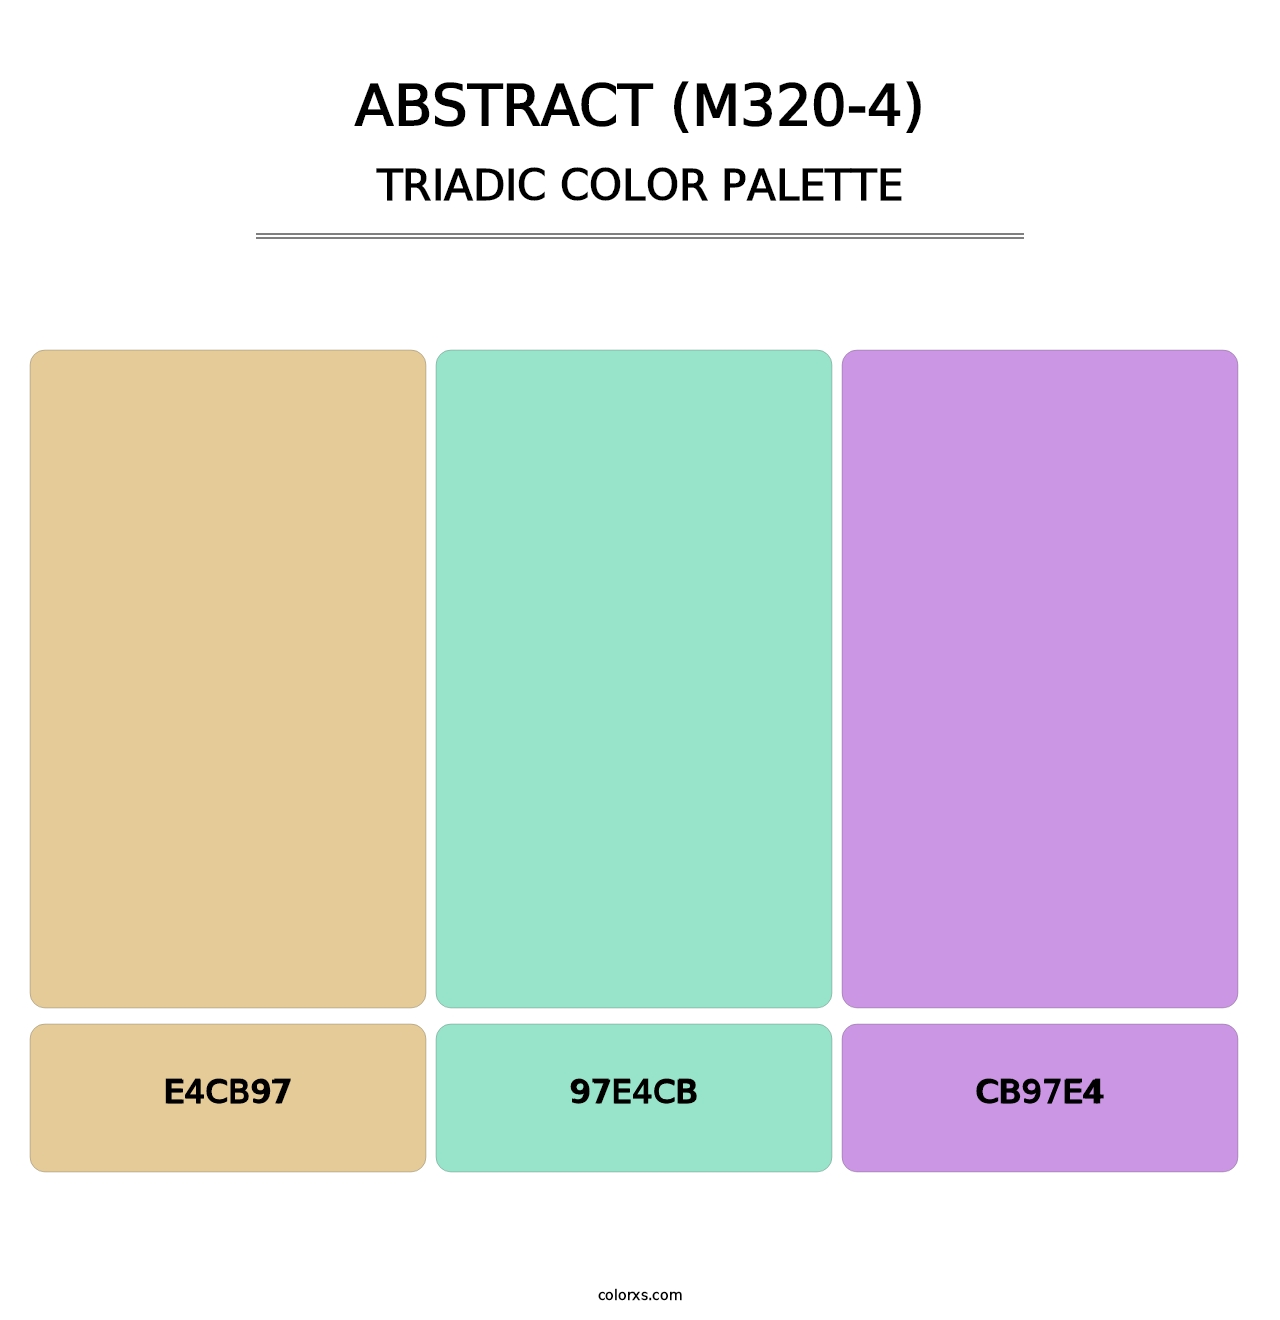 Abstract (M320-4) - Triadic Color Palette